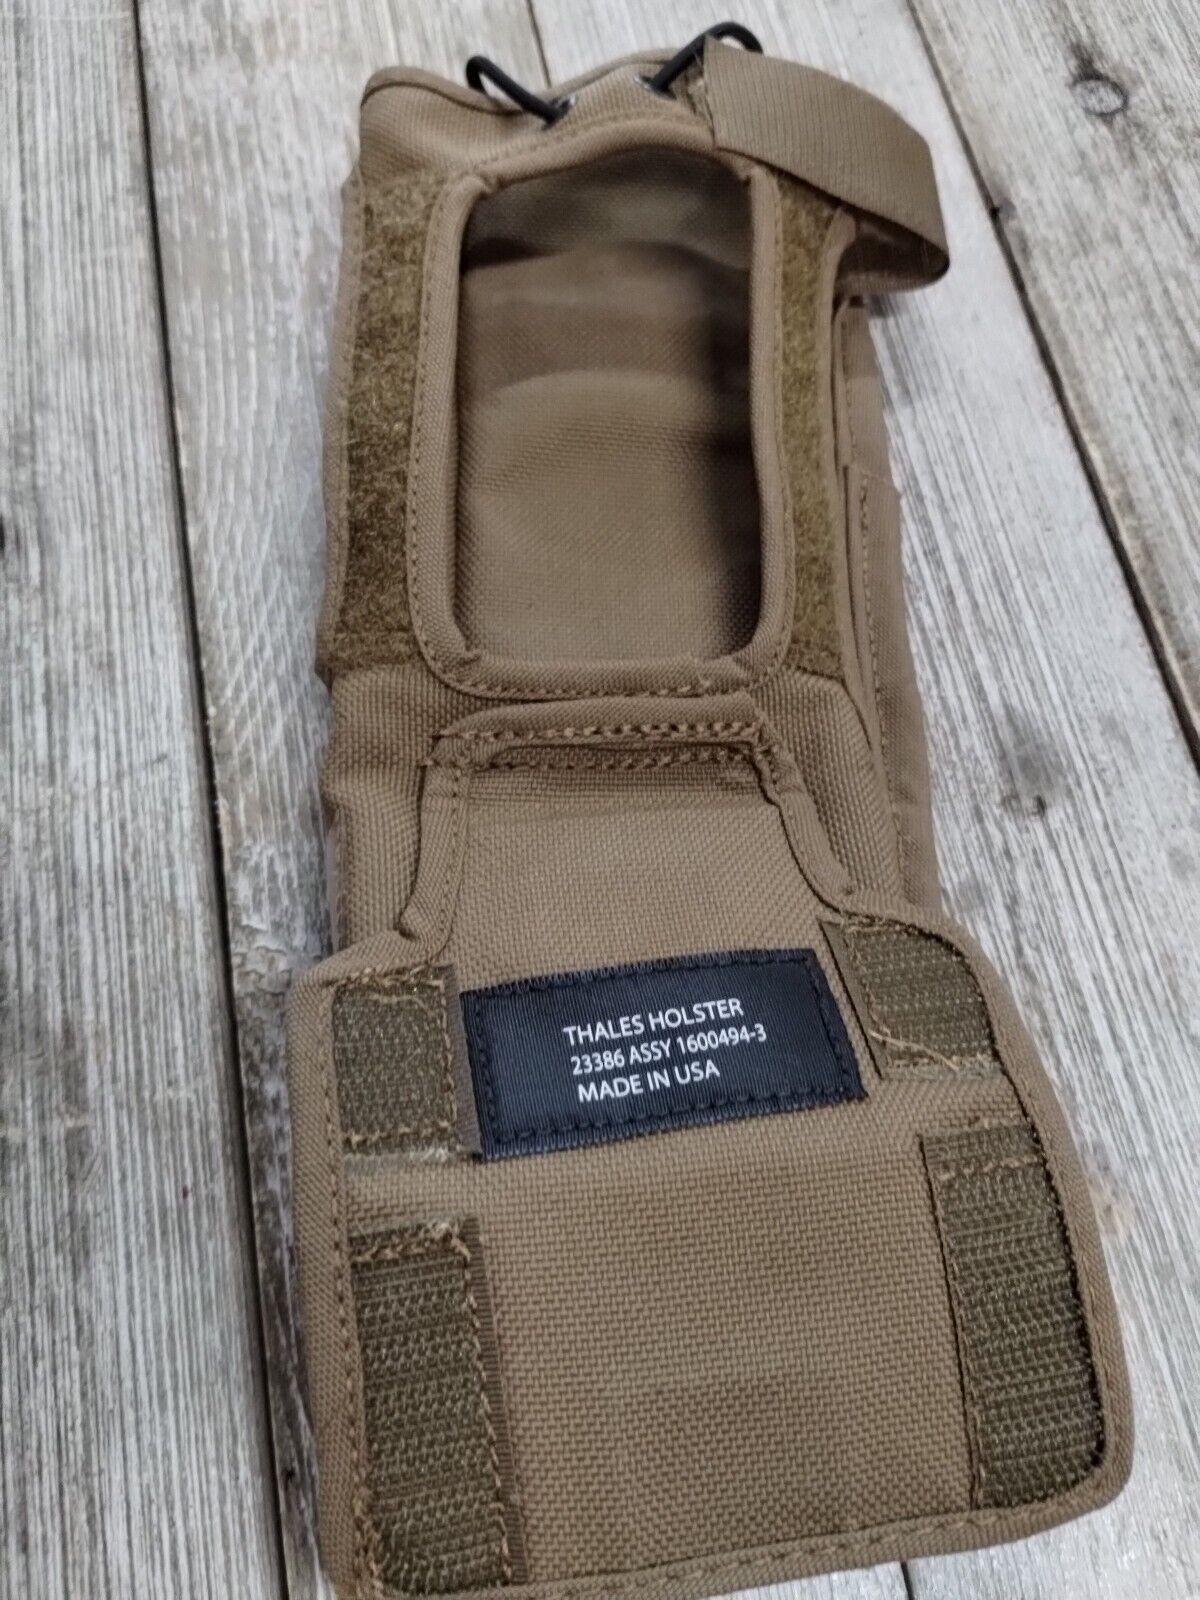 NOS MARSOC THALES AN/PRC-148 RADIO HOLSTER / POUCH - COYOTE BROWN